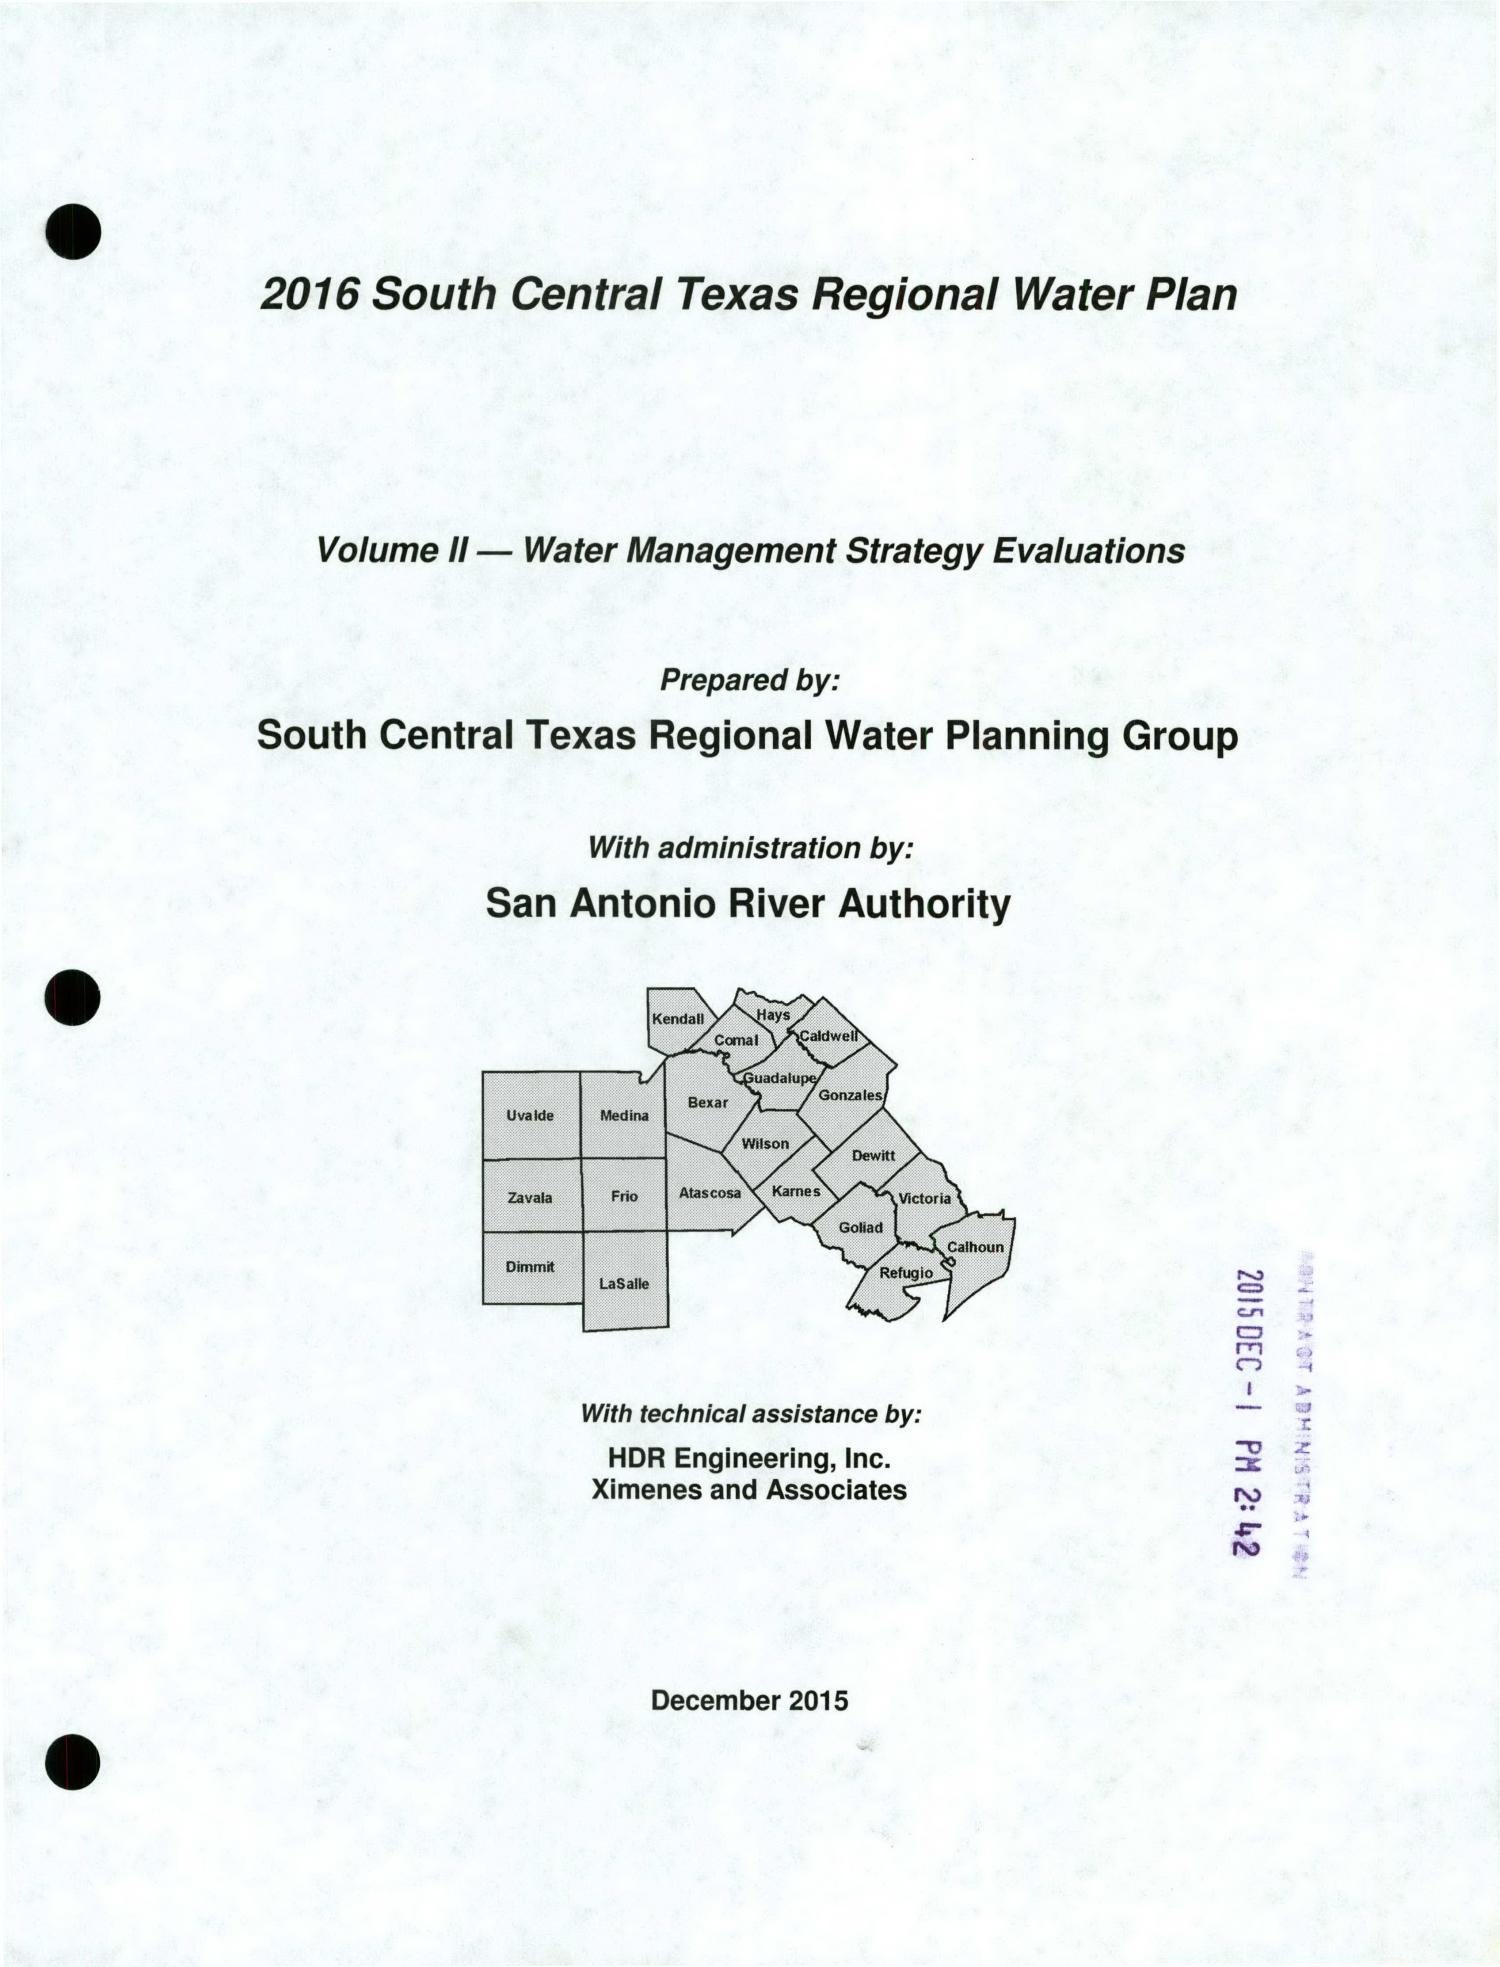 Regional Water Plan: Region L (South Central Texas), 2016, Volume 2. Water Management Strategies
                                                
                                                    Cover Page
                                                